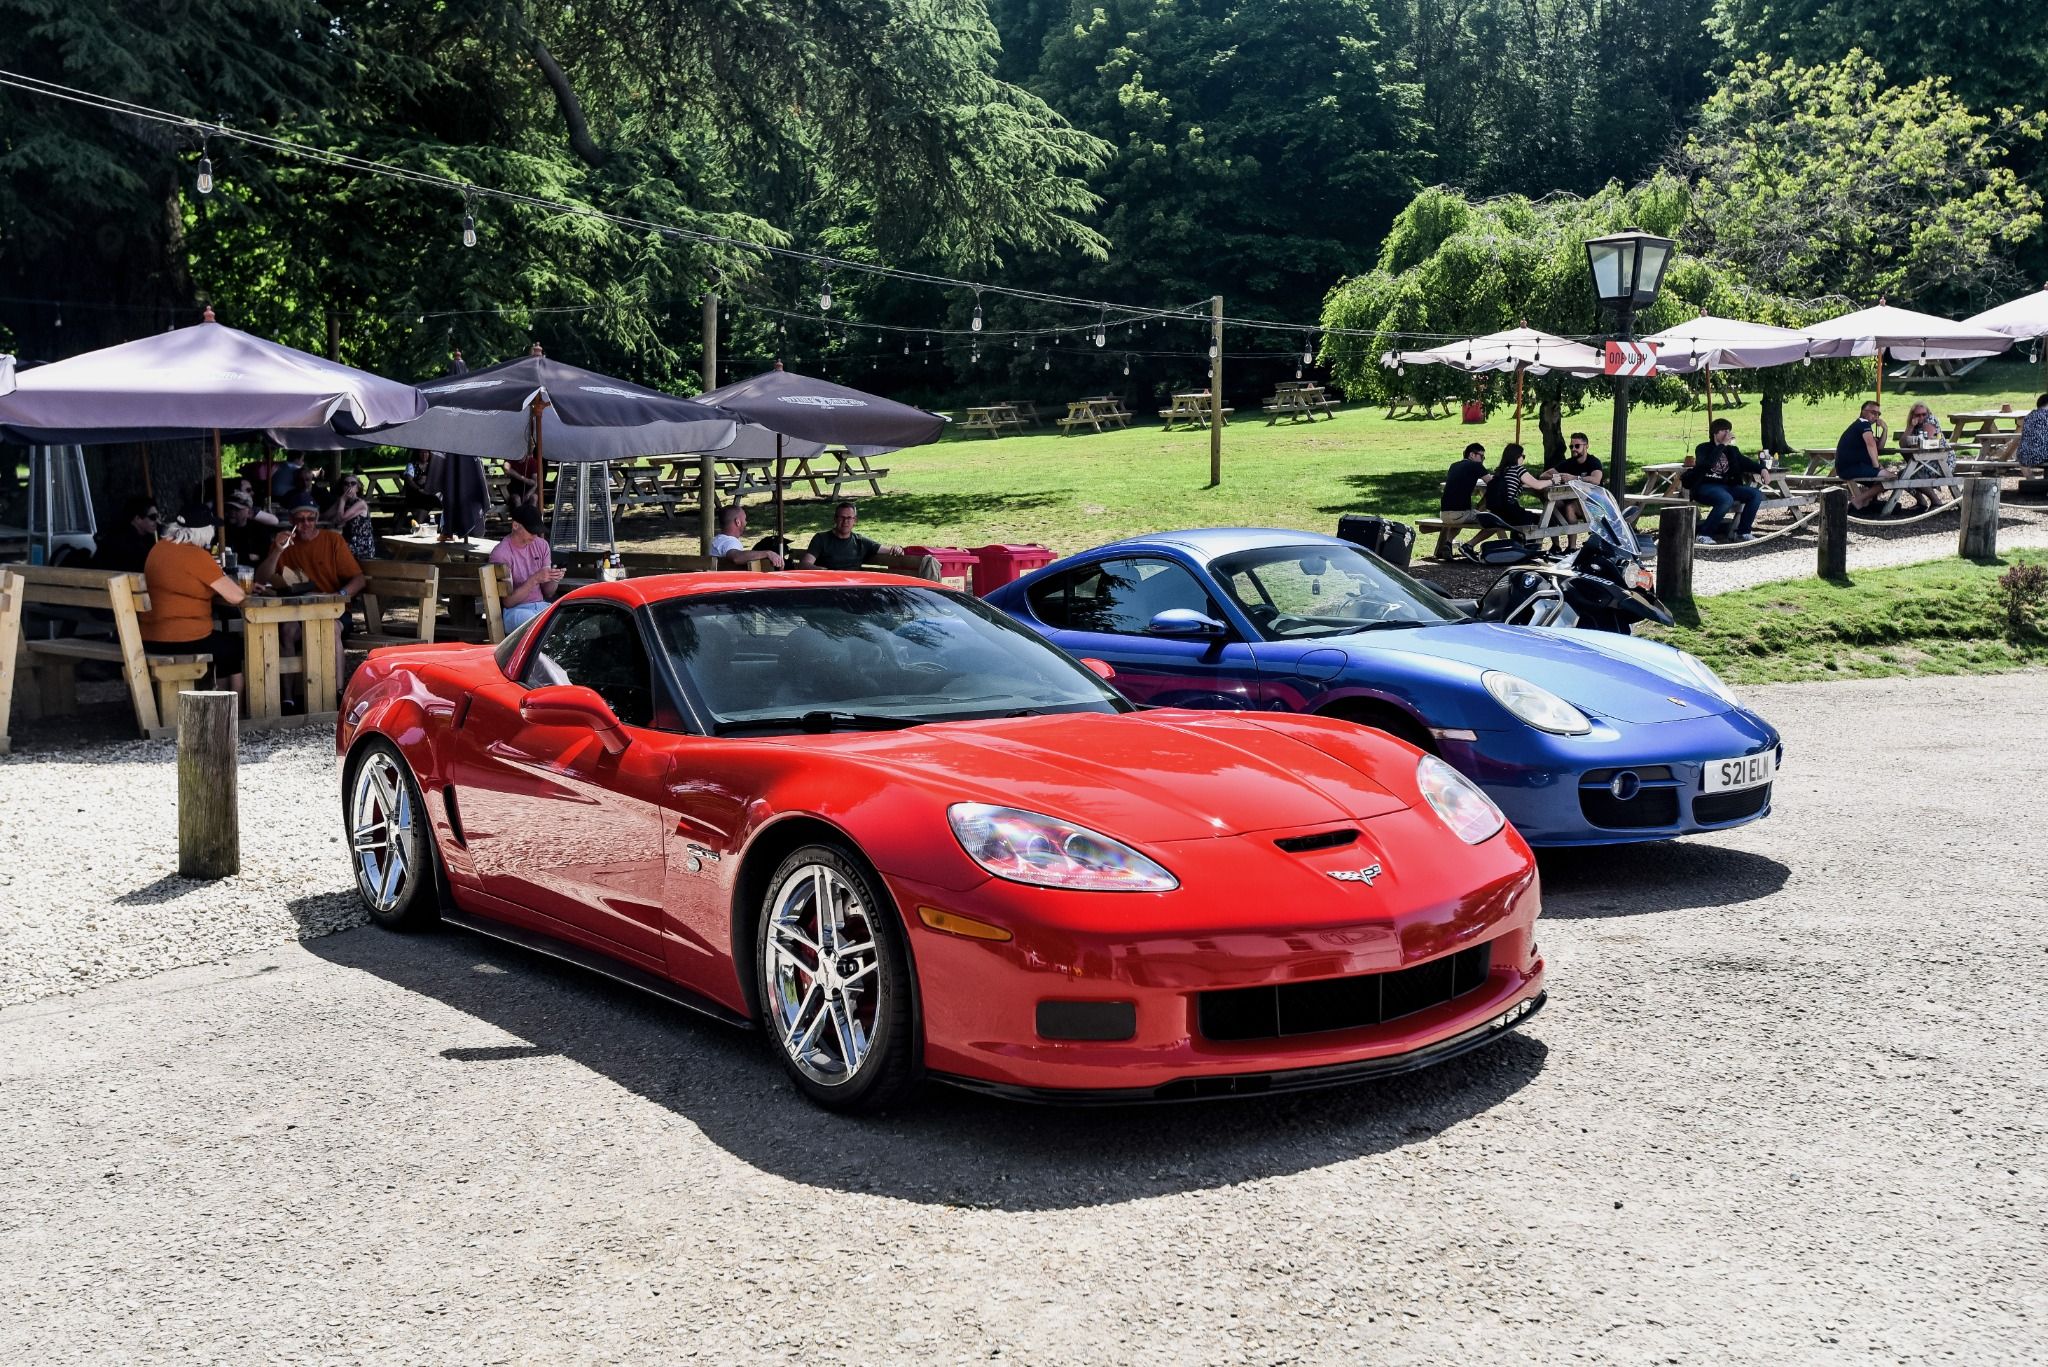 Red and Blue sports cars next to each other in front of park benches and grass